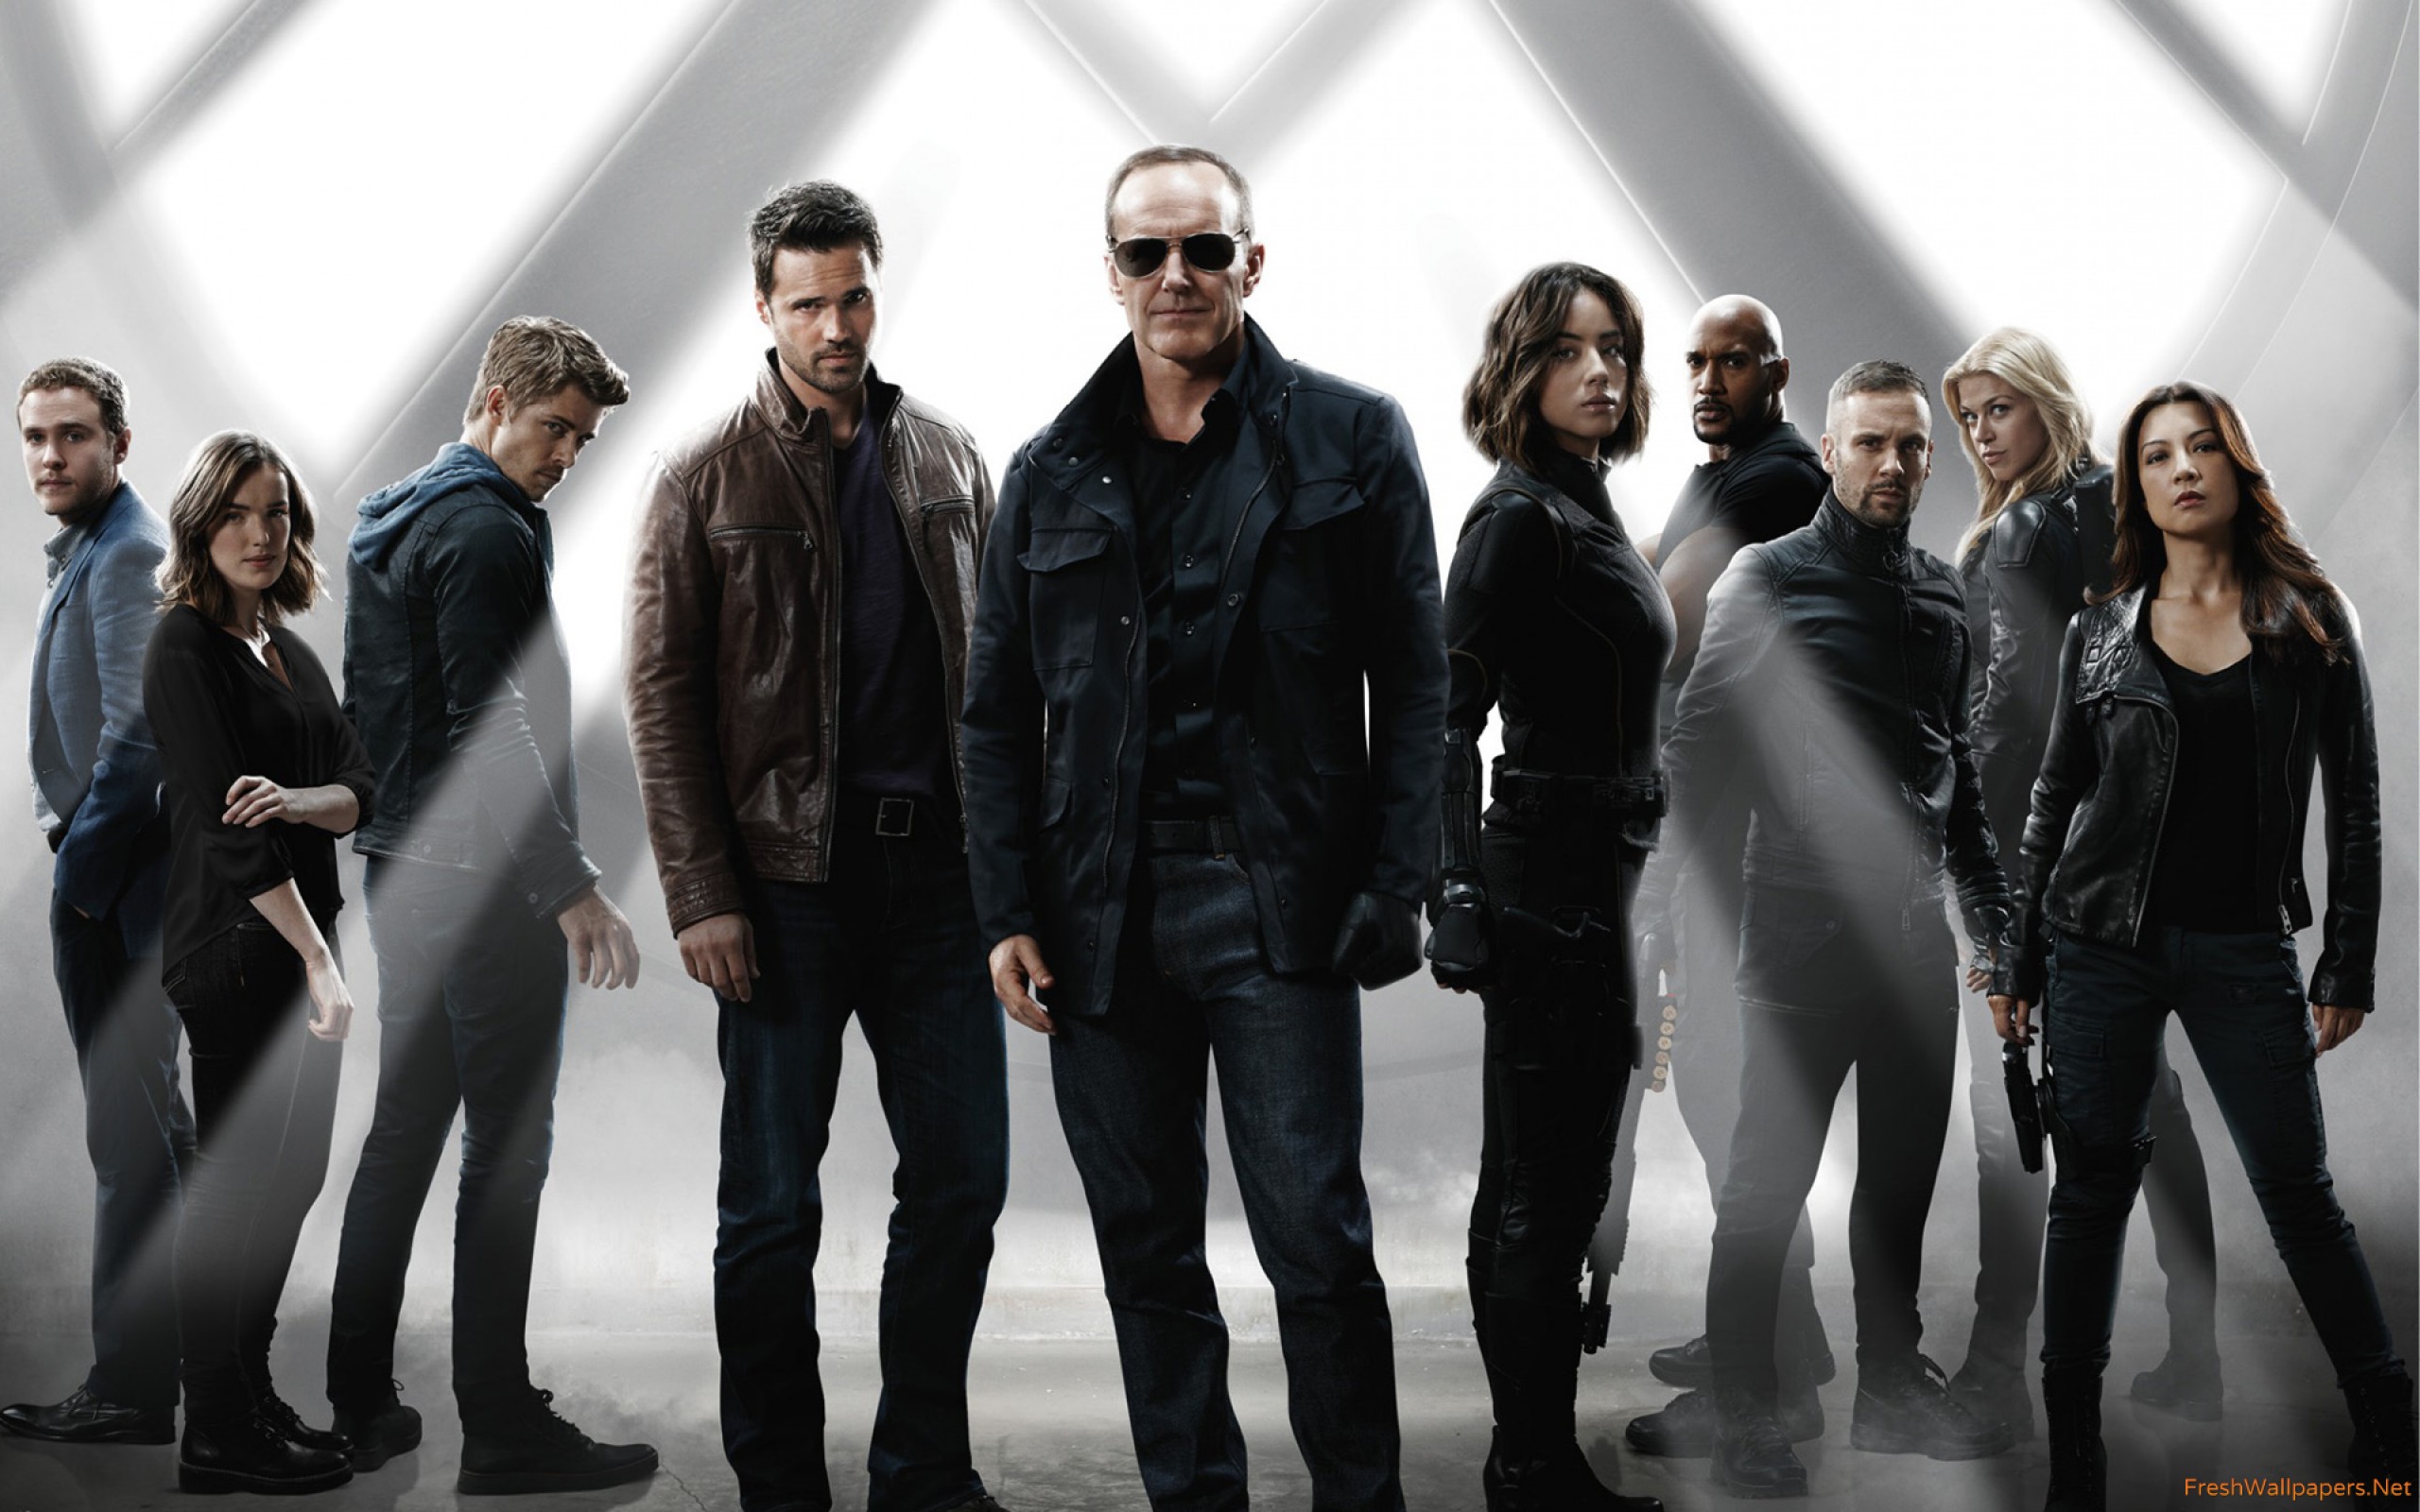 It took three seasons, but Agents of S.H.I.E.L.D. is finally the Marvel show we deserve